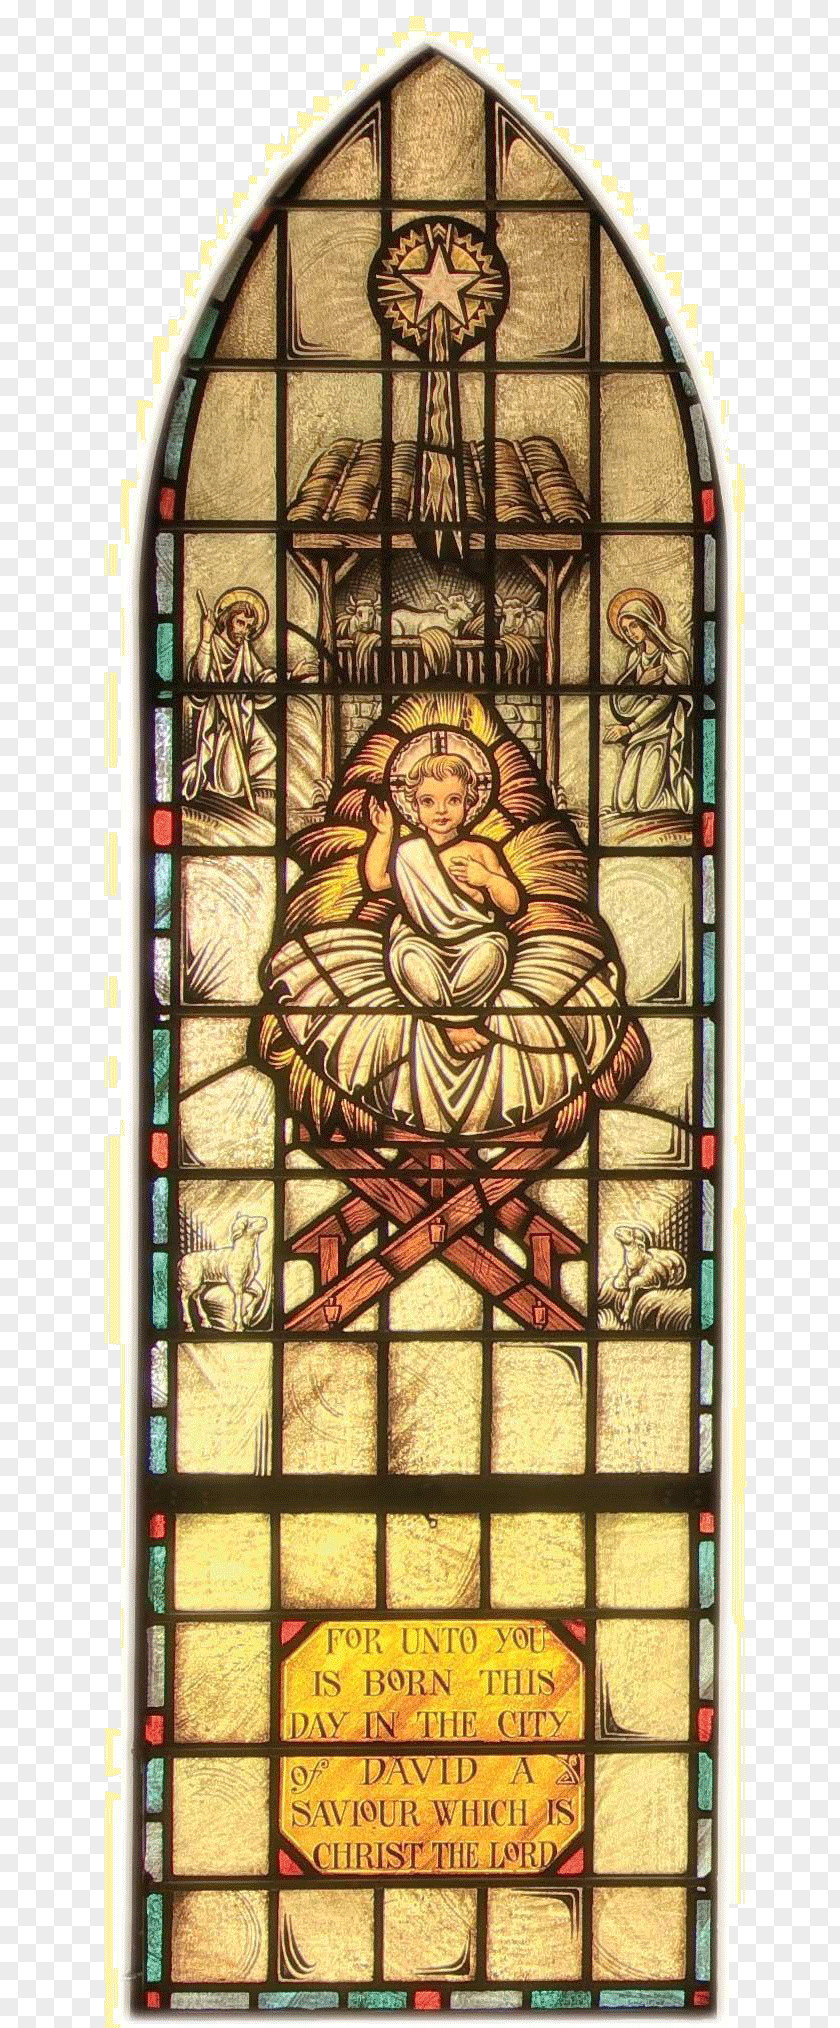 Catholic Stained Glass Window Clip Art PNG